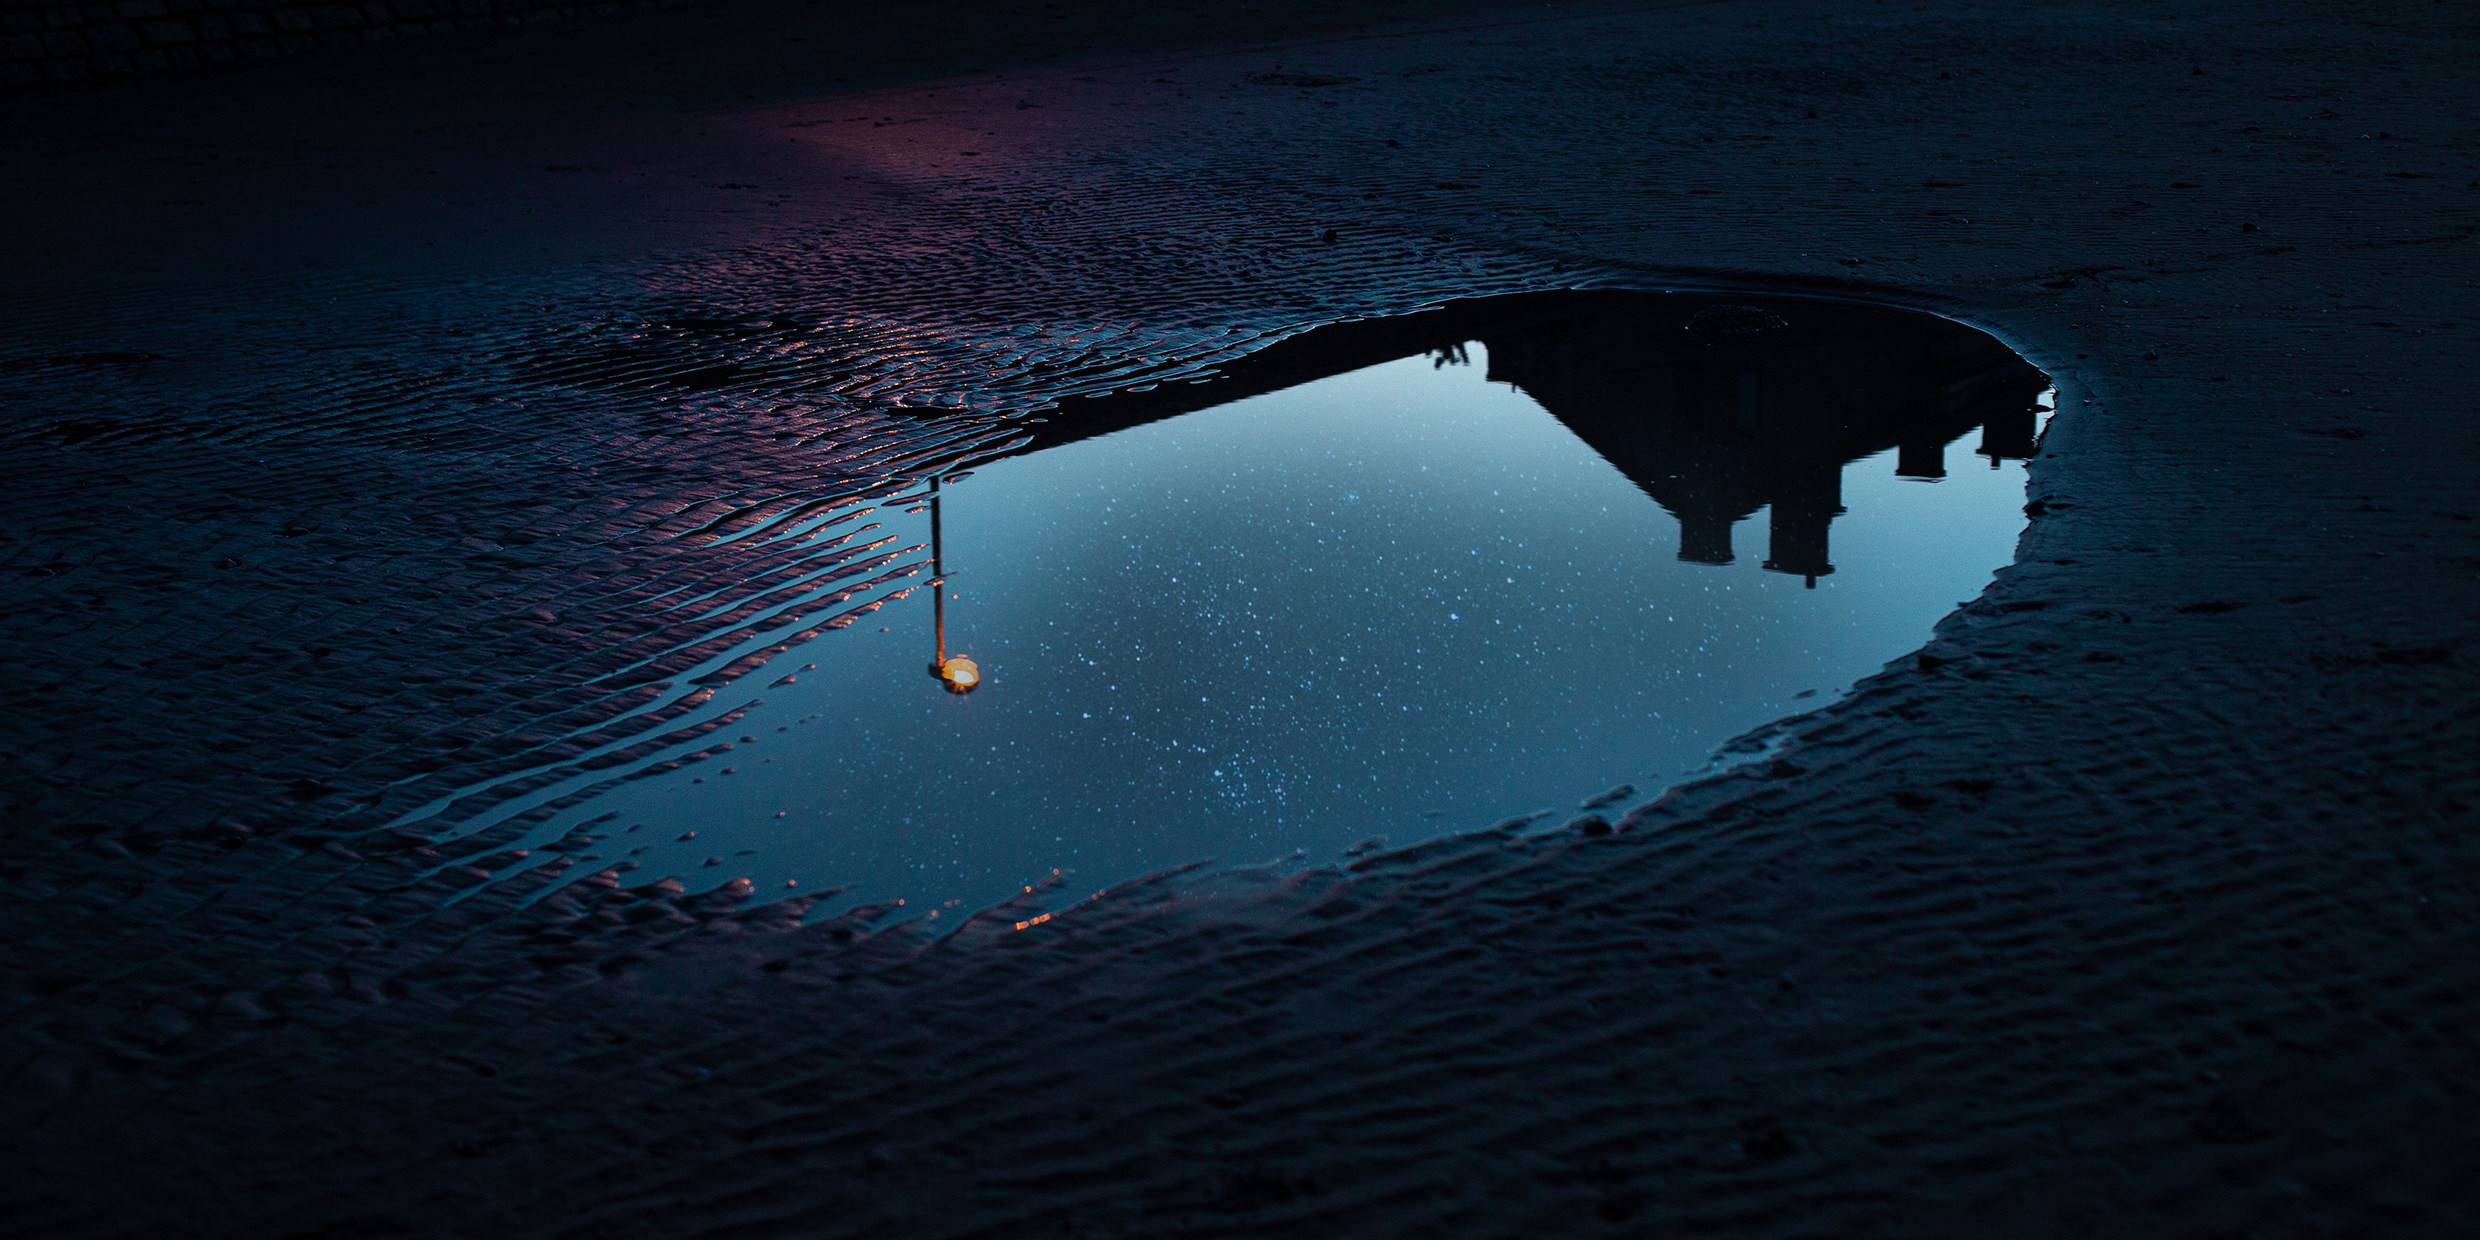 Image of a puddle of water reflecting the night sky